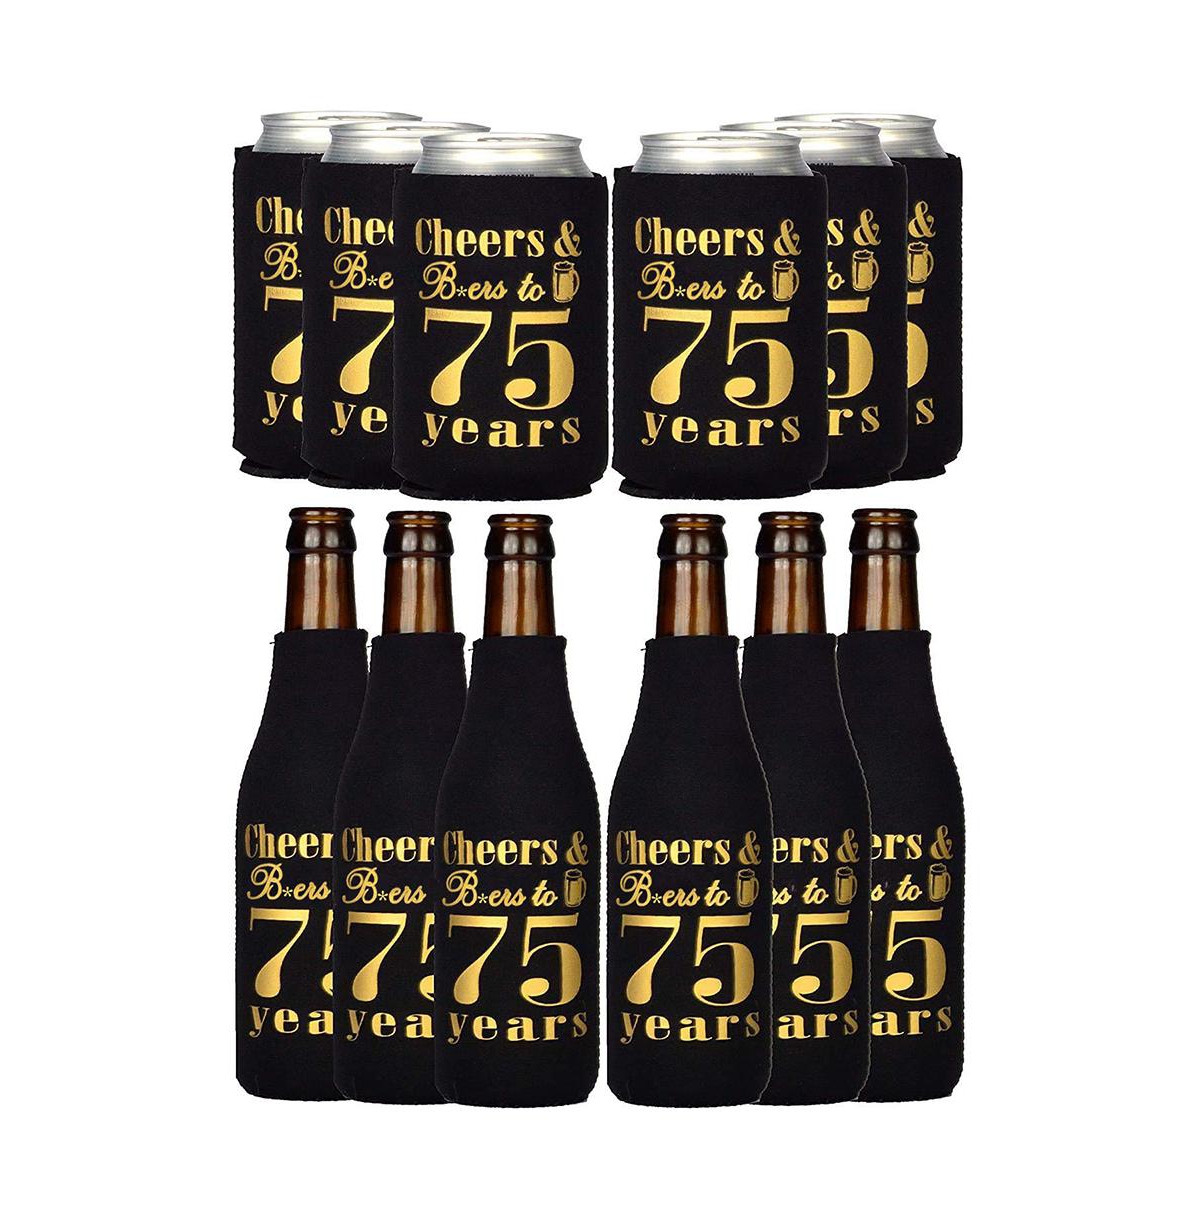 Men's 75th Birthday Black & Gold Neoprene Can Coolers - Insulated Bottle Sleeves for Beer & Soda - Slim, Classy Design Personalized Party Favors - Bla